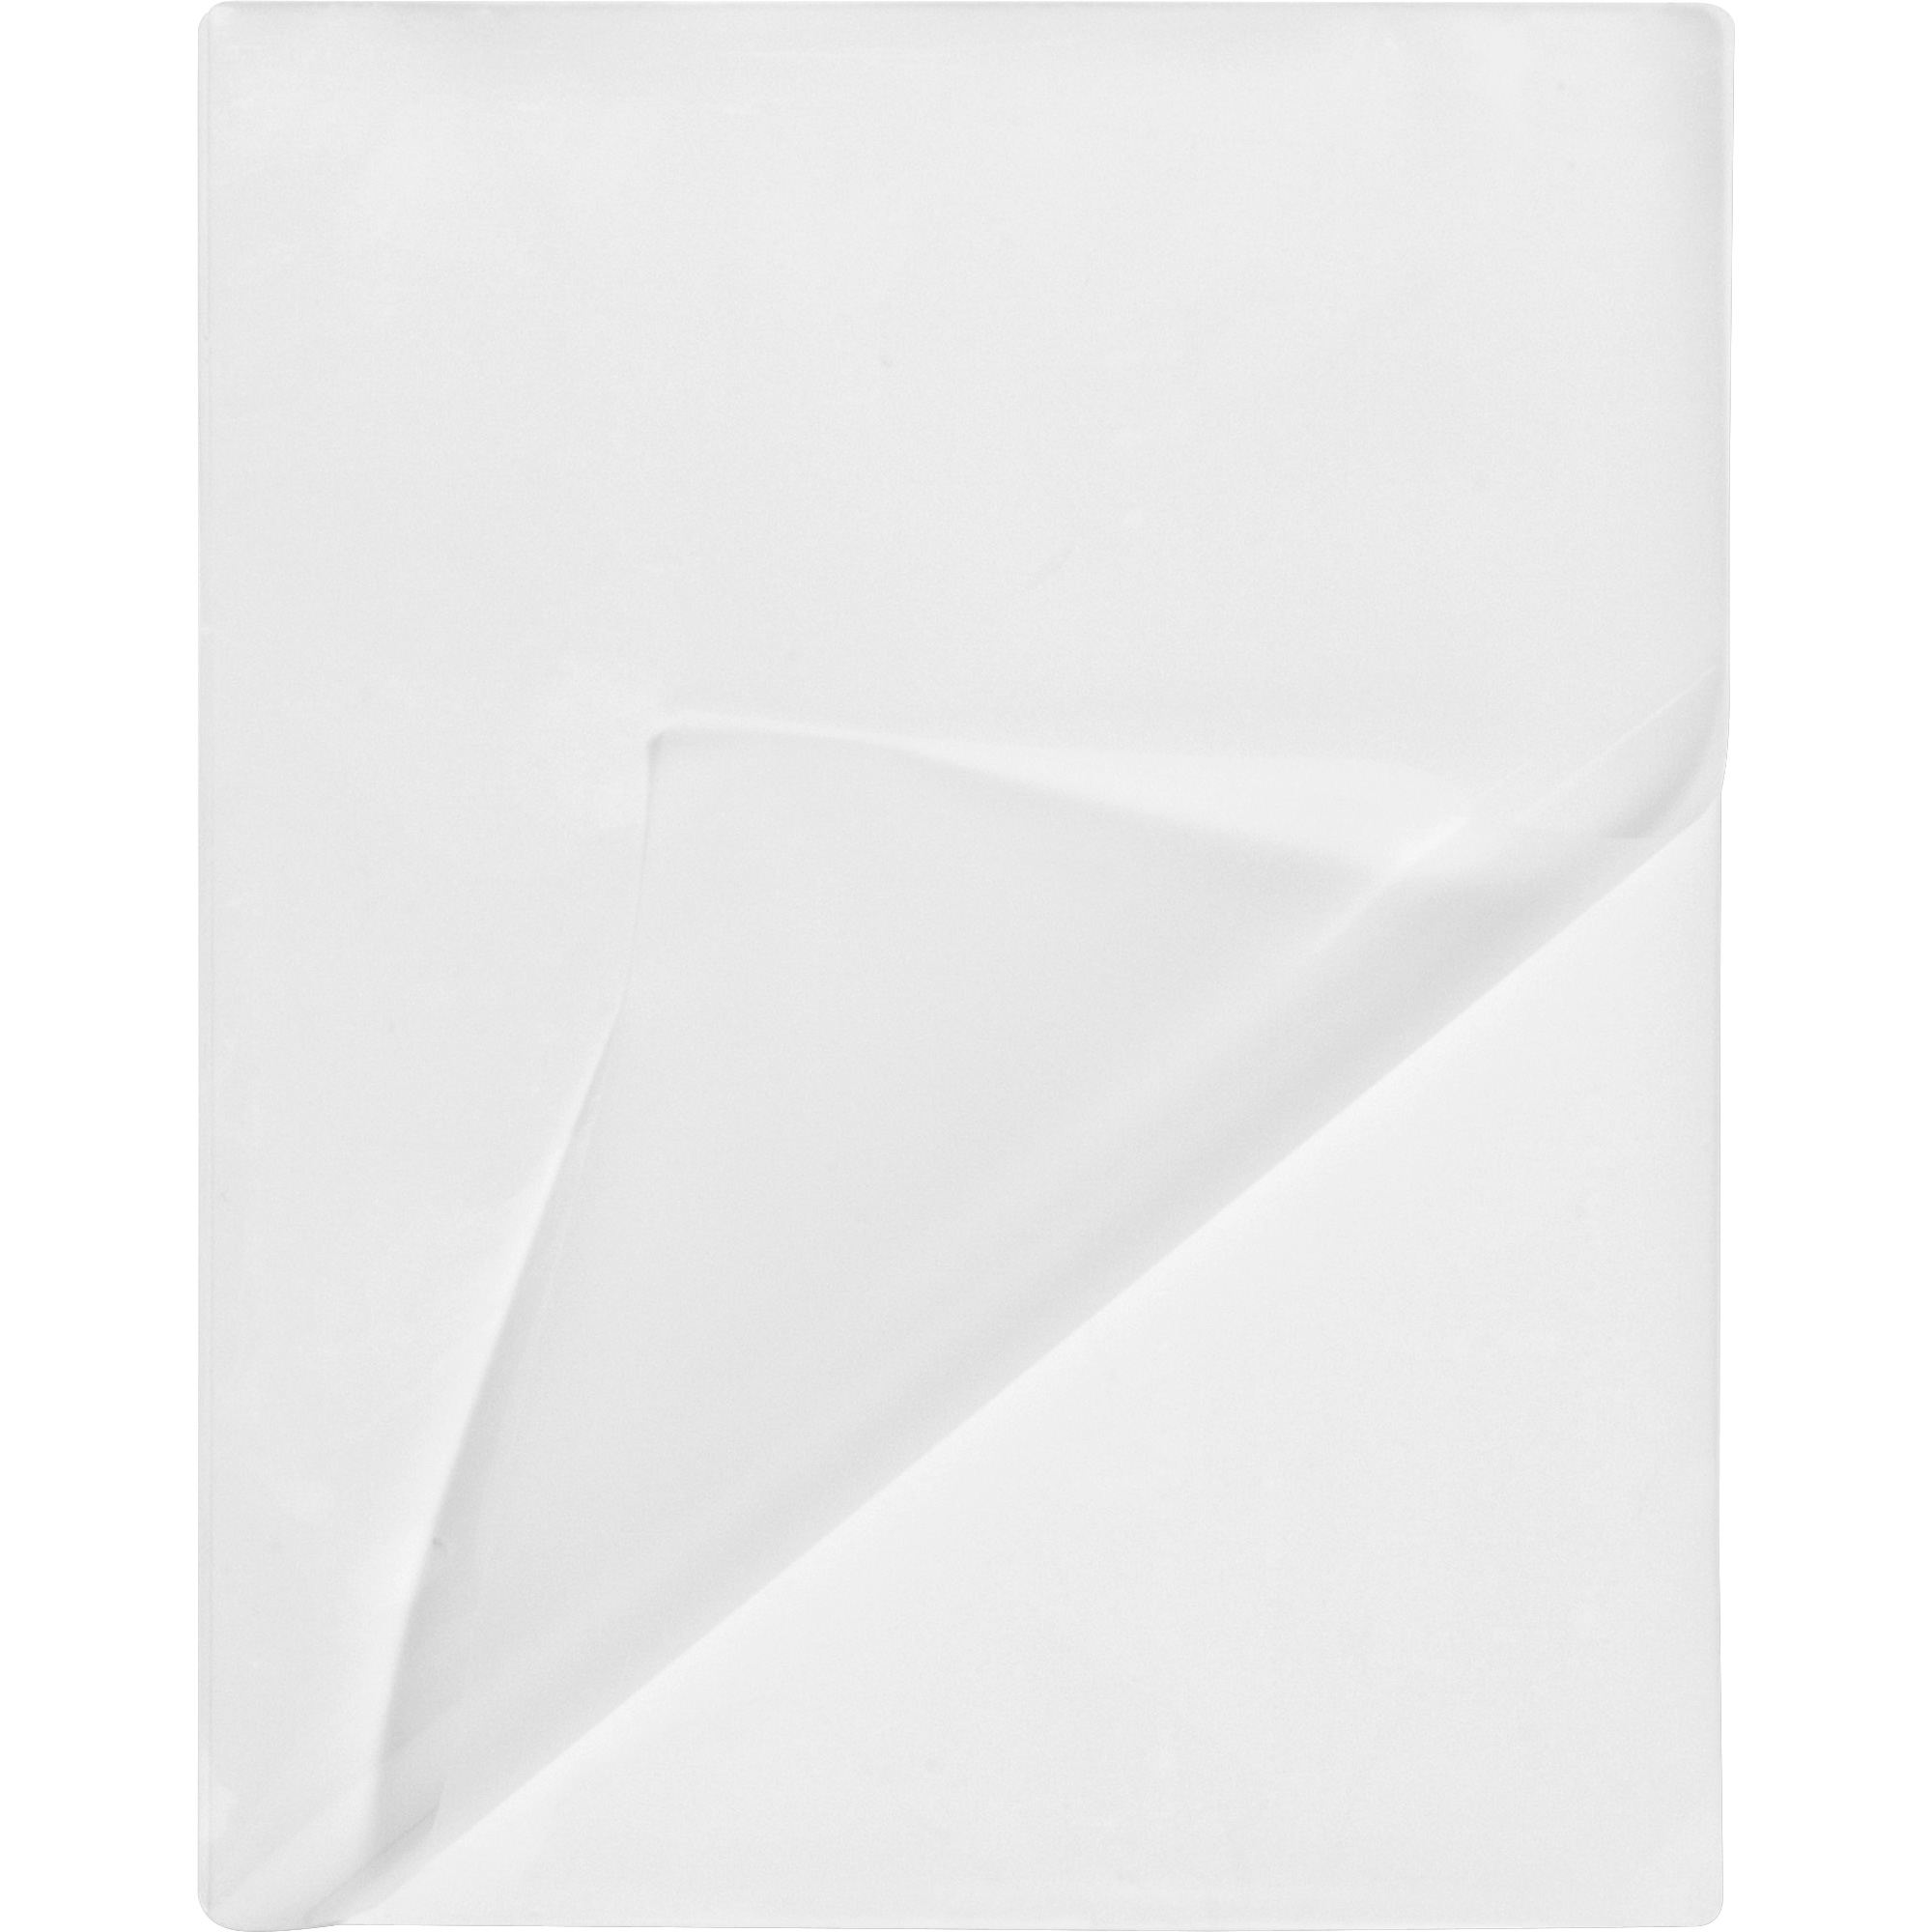 Business Source 5 ml Letter-size Laminating Pouches - 200 Sheets